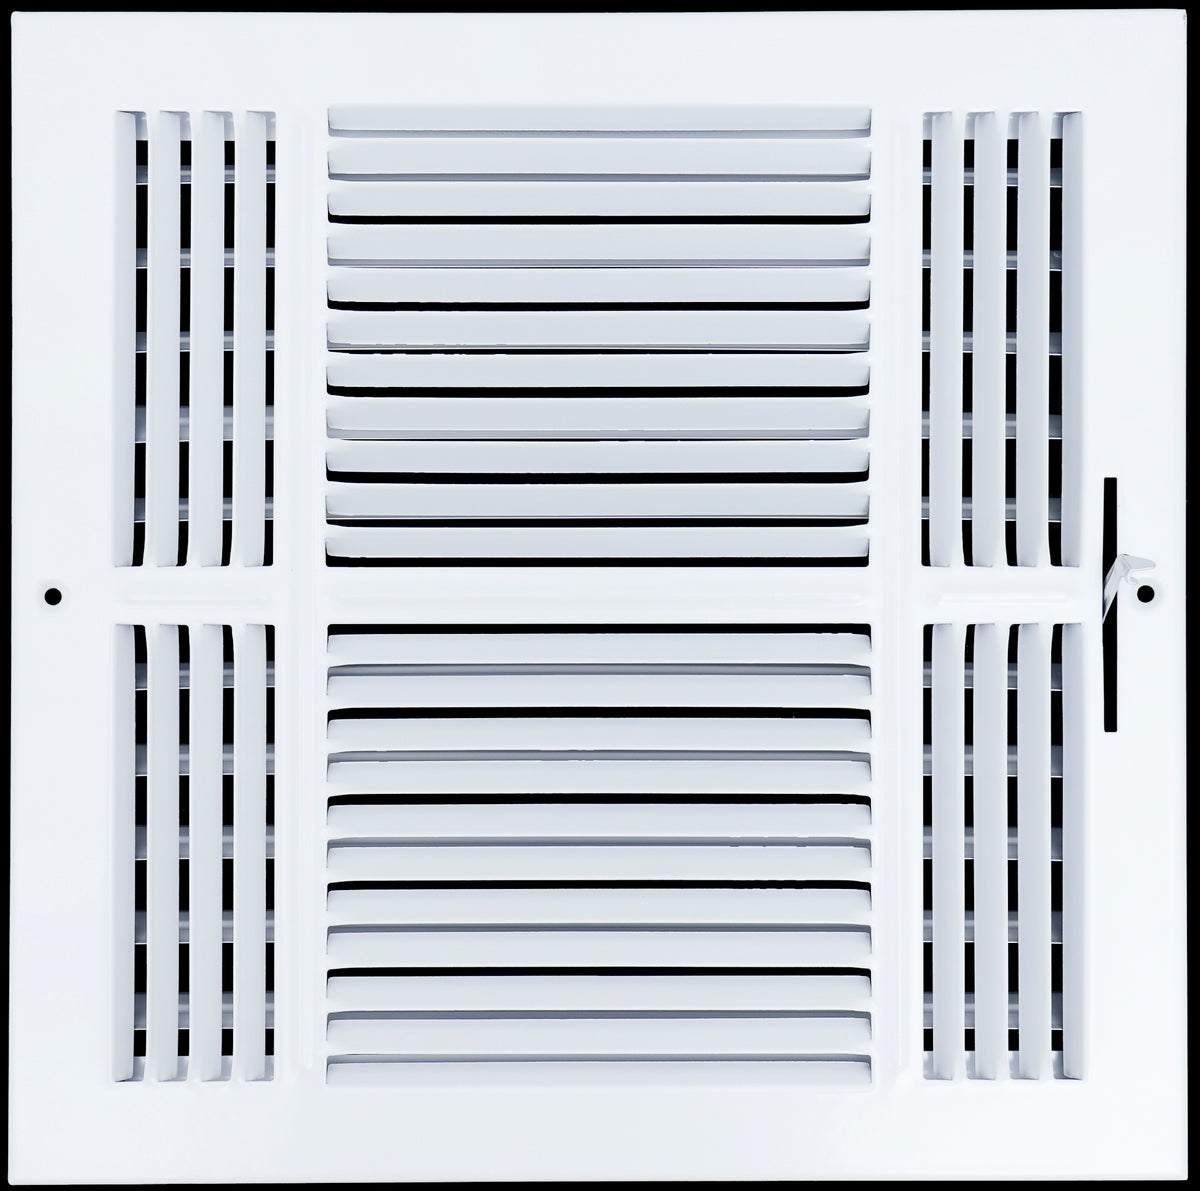 airgrilles 12 x 12 duct opening  -  4 way steel air supply diffuser for sidewall and ceiling hnd-asg-wh-4way-12x12 764613097849 - 1